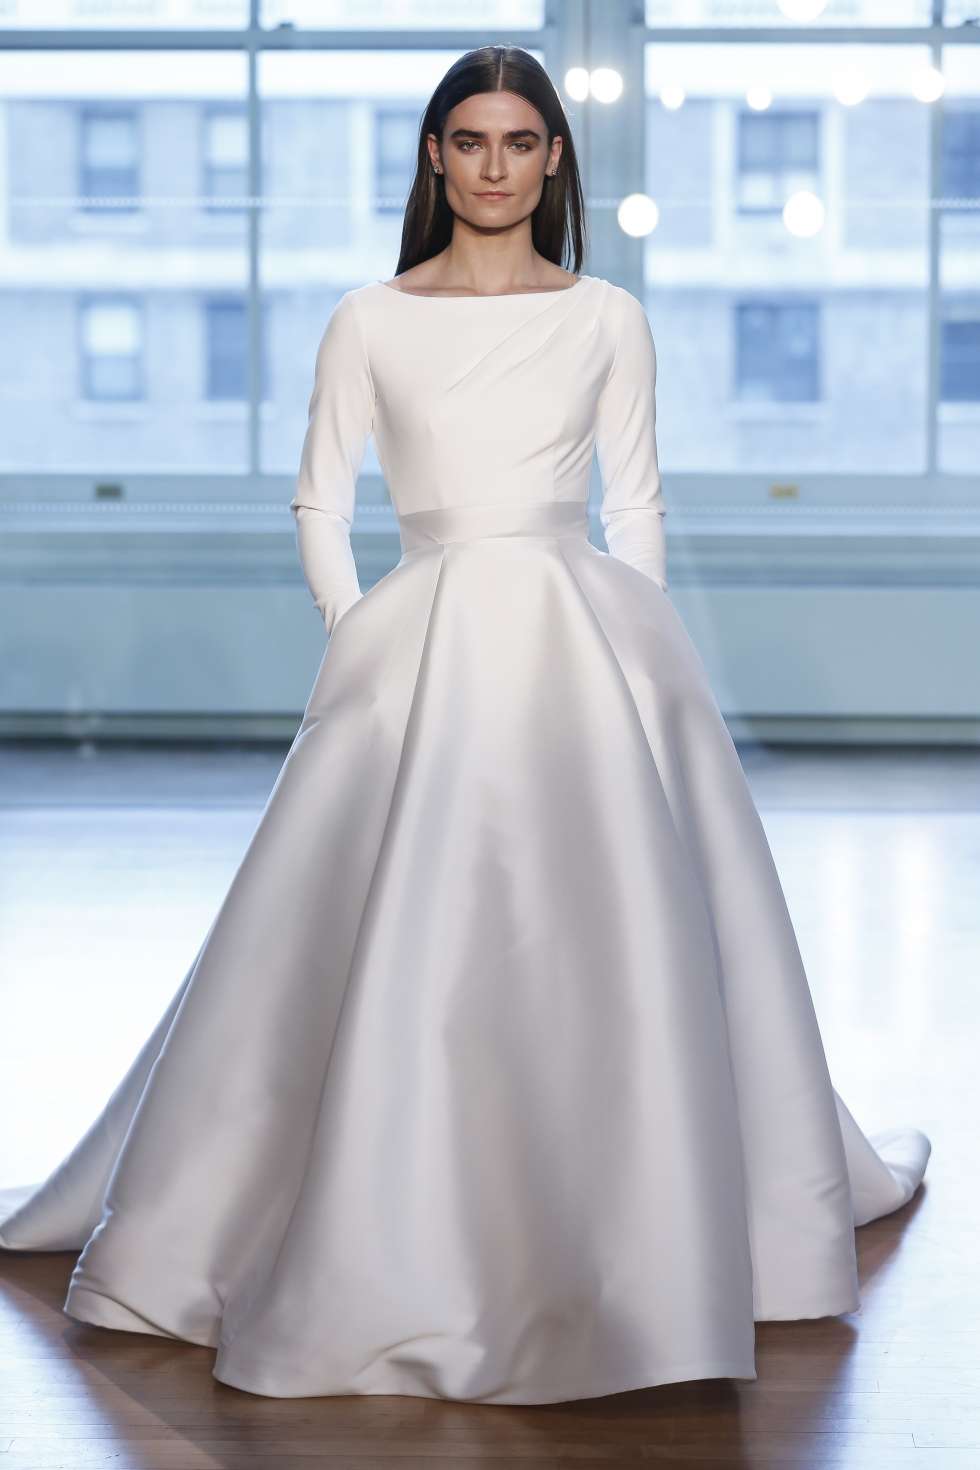 2019 Wedding Dresses That Are Hijab Approved